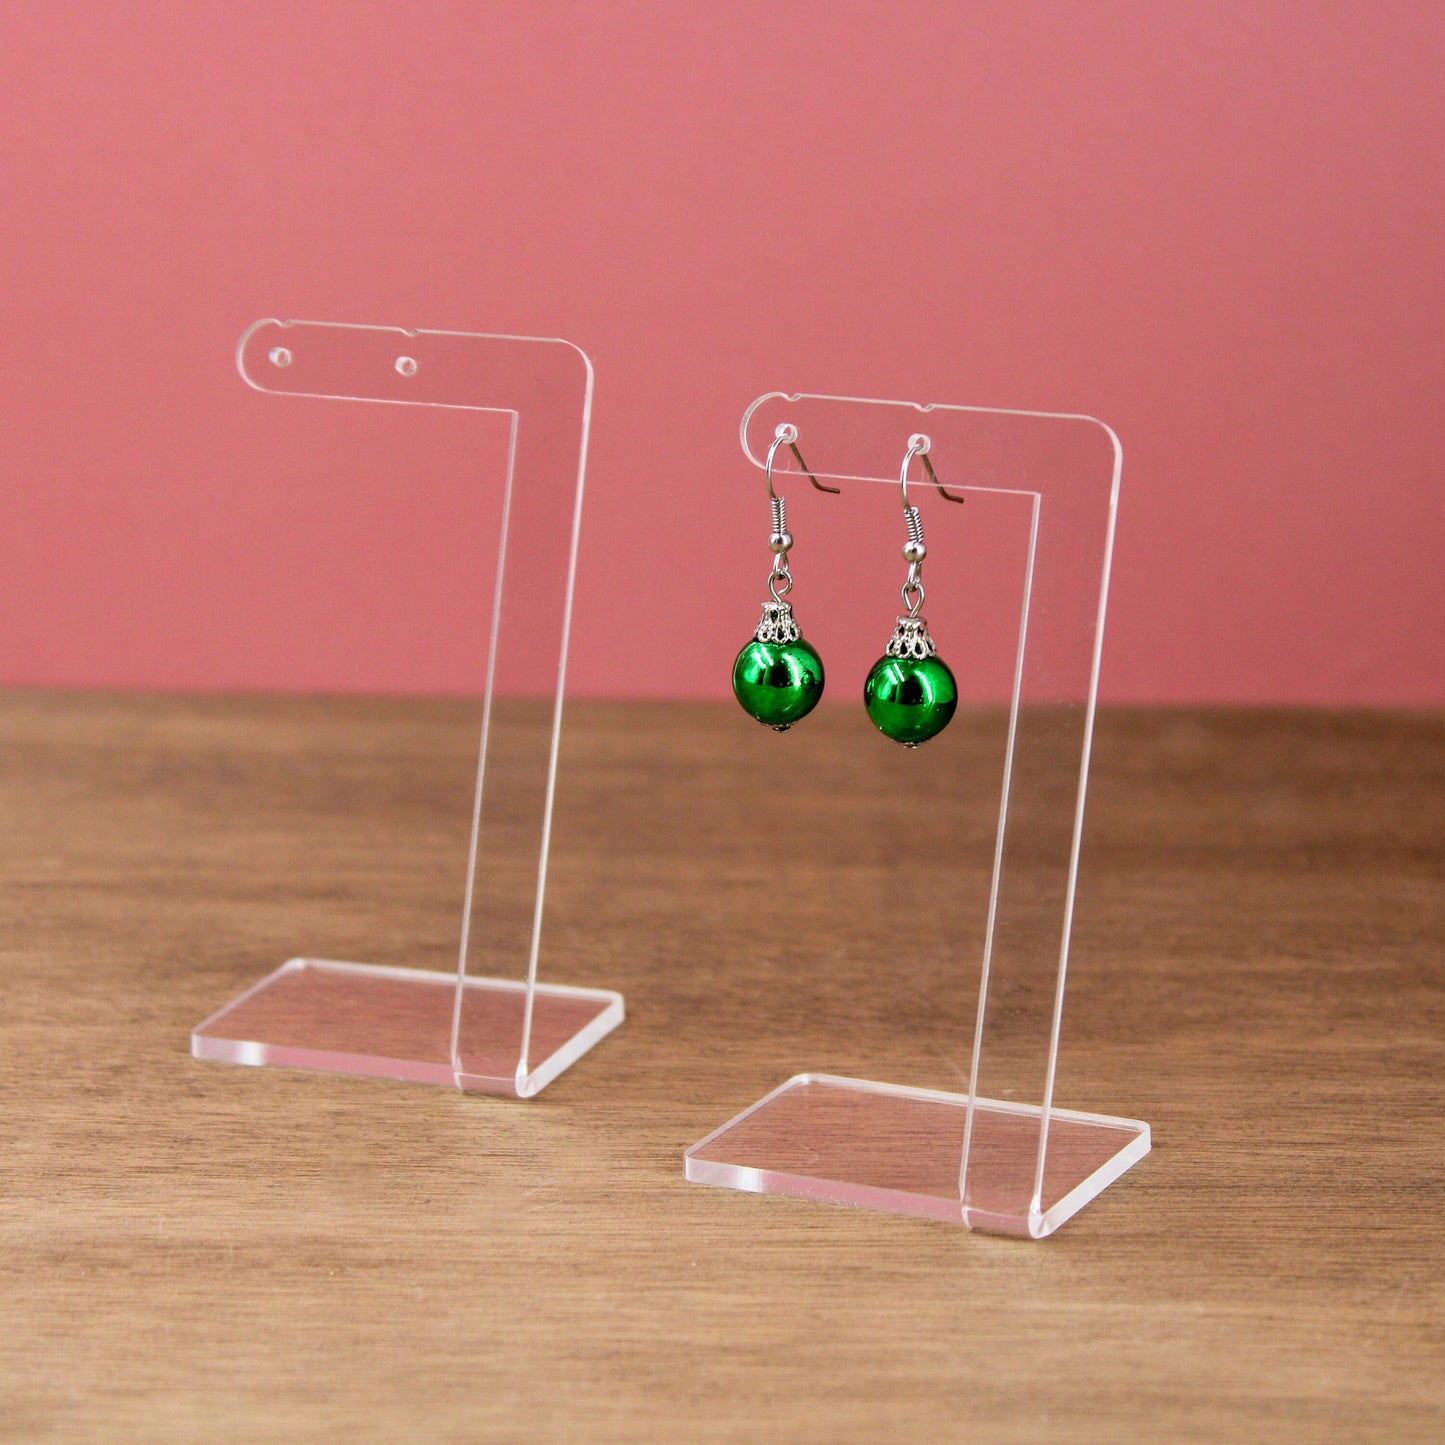 Clear Earring Display - Acrylic Market Stall Earring Holder